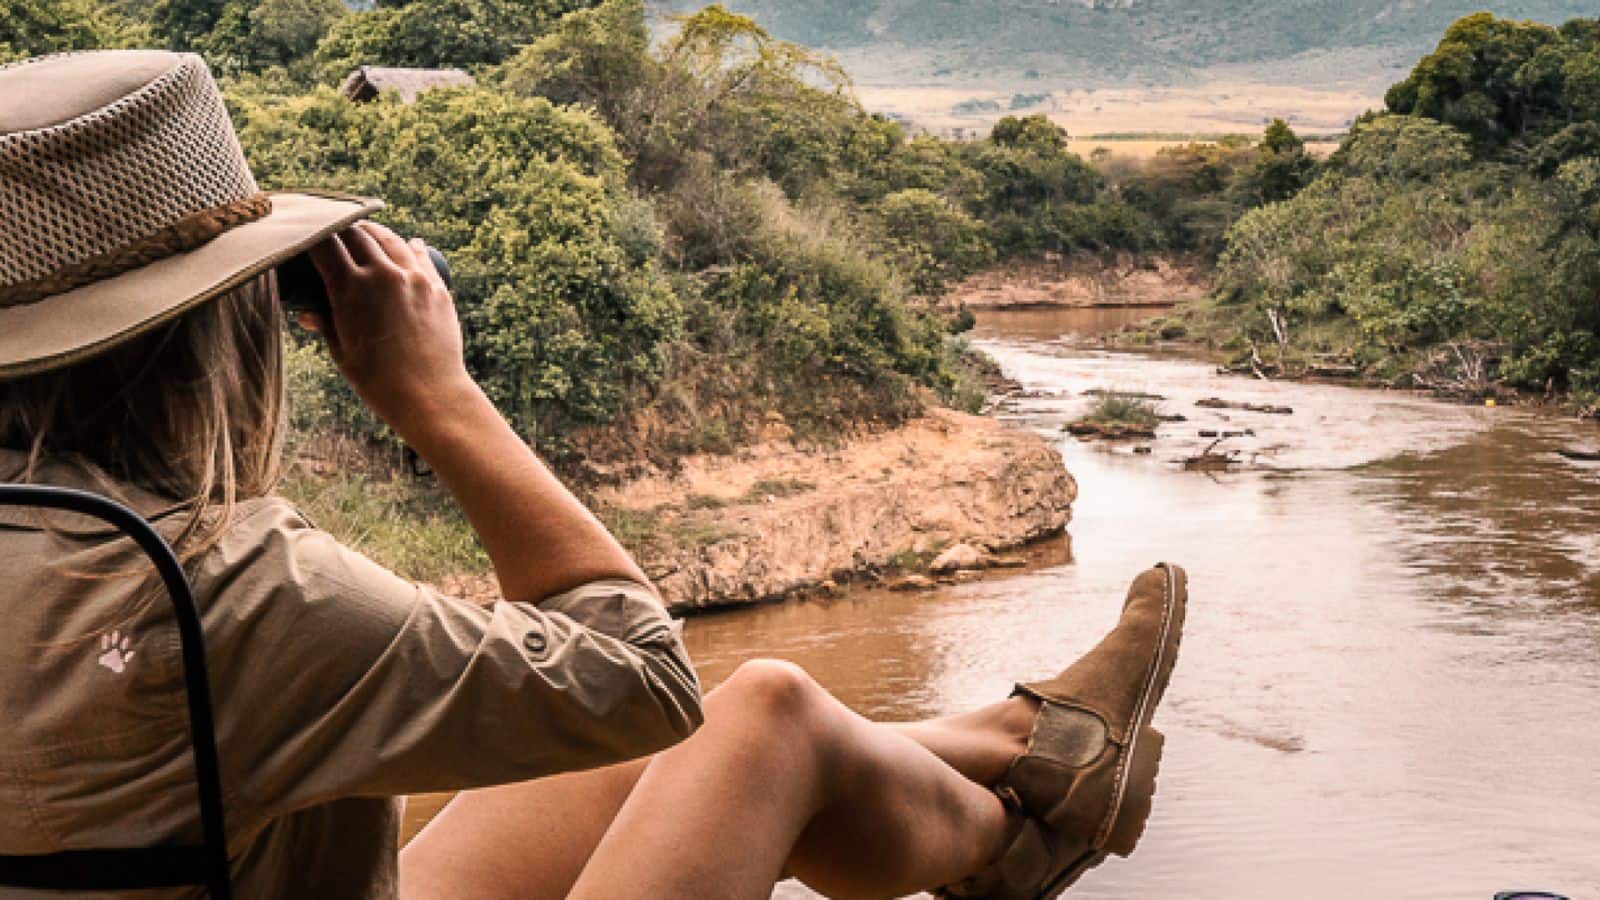 Cape Town safari experience: Don't forget to pack these essentials